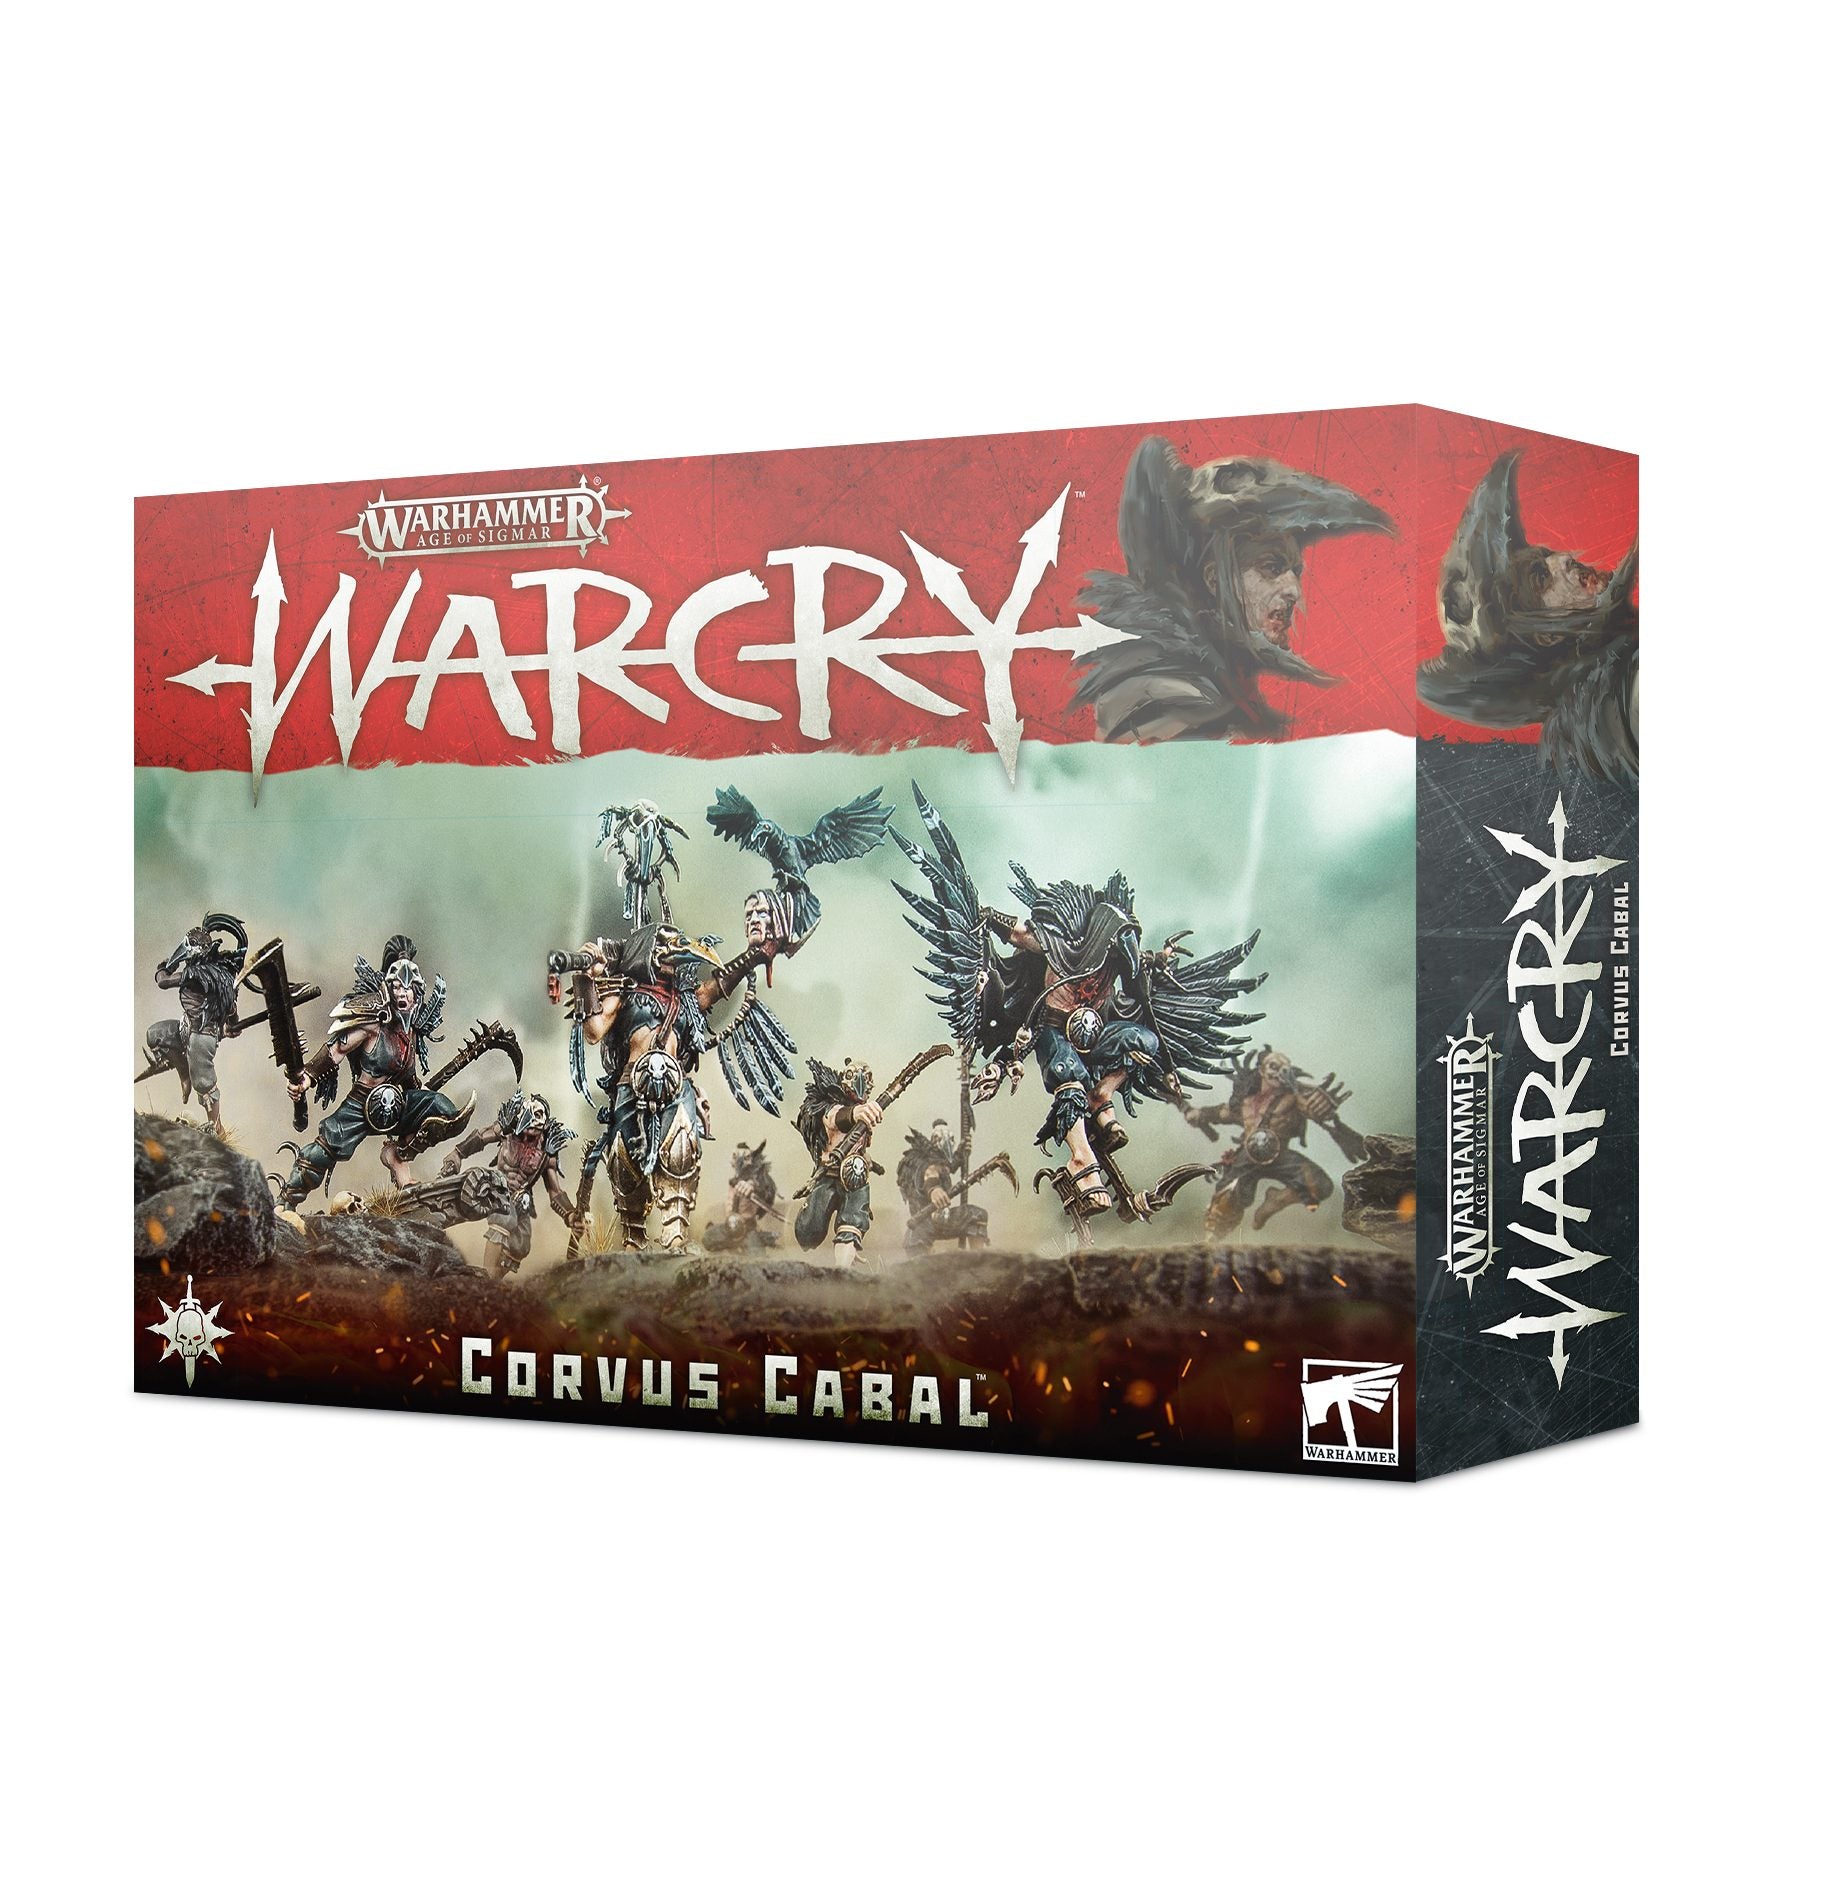 Warhammer Age of Sigmar: Warcry: Corvus Cabal